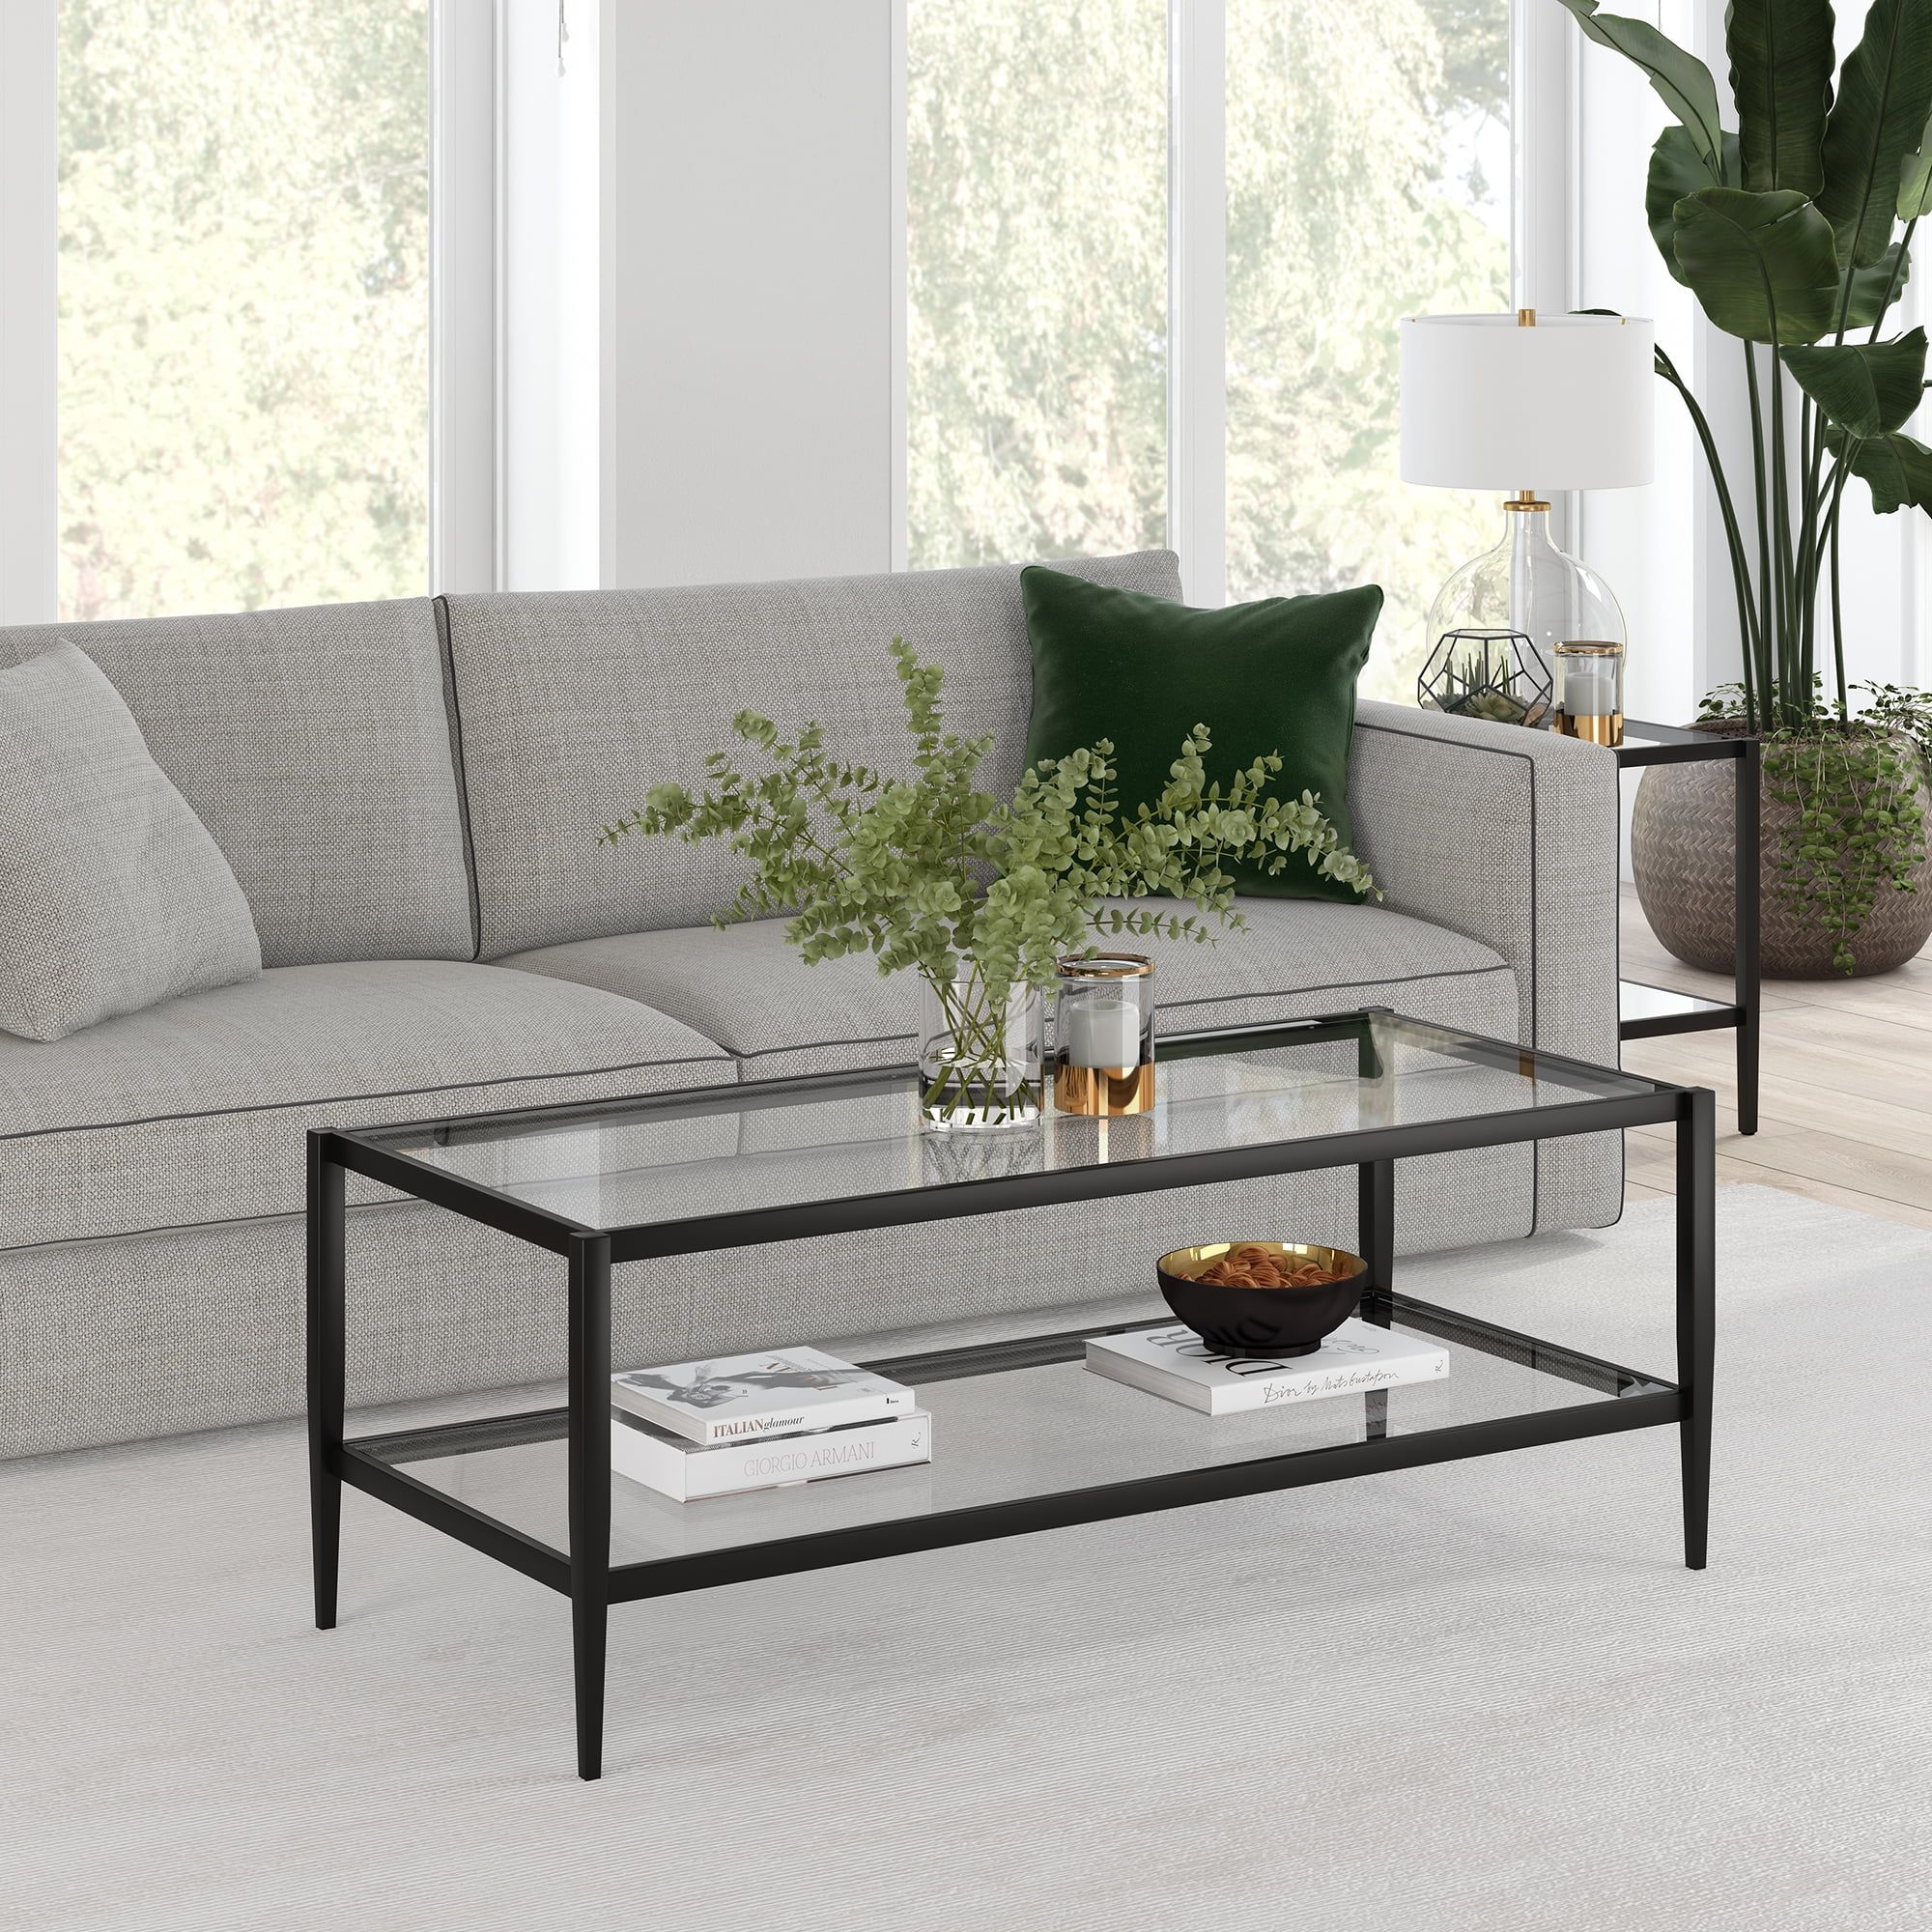 Modern Glass Coffee Table, Rectangular Cocktail Table In Blackened With Rectangular Coffee Tables With Pedestal Bases (View 9 of 20)